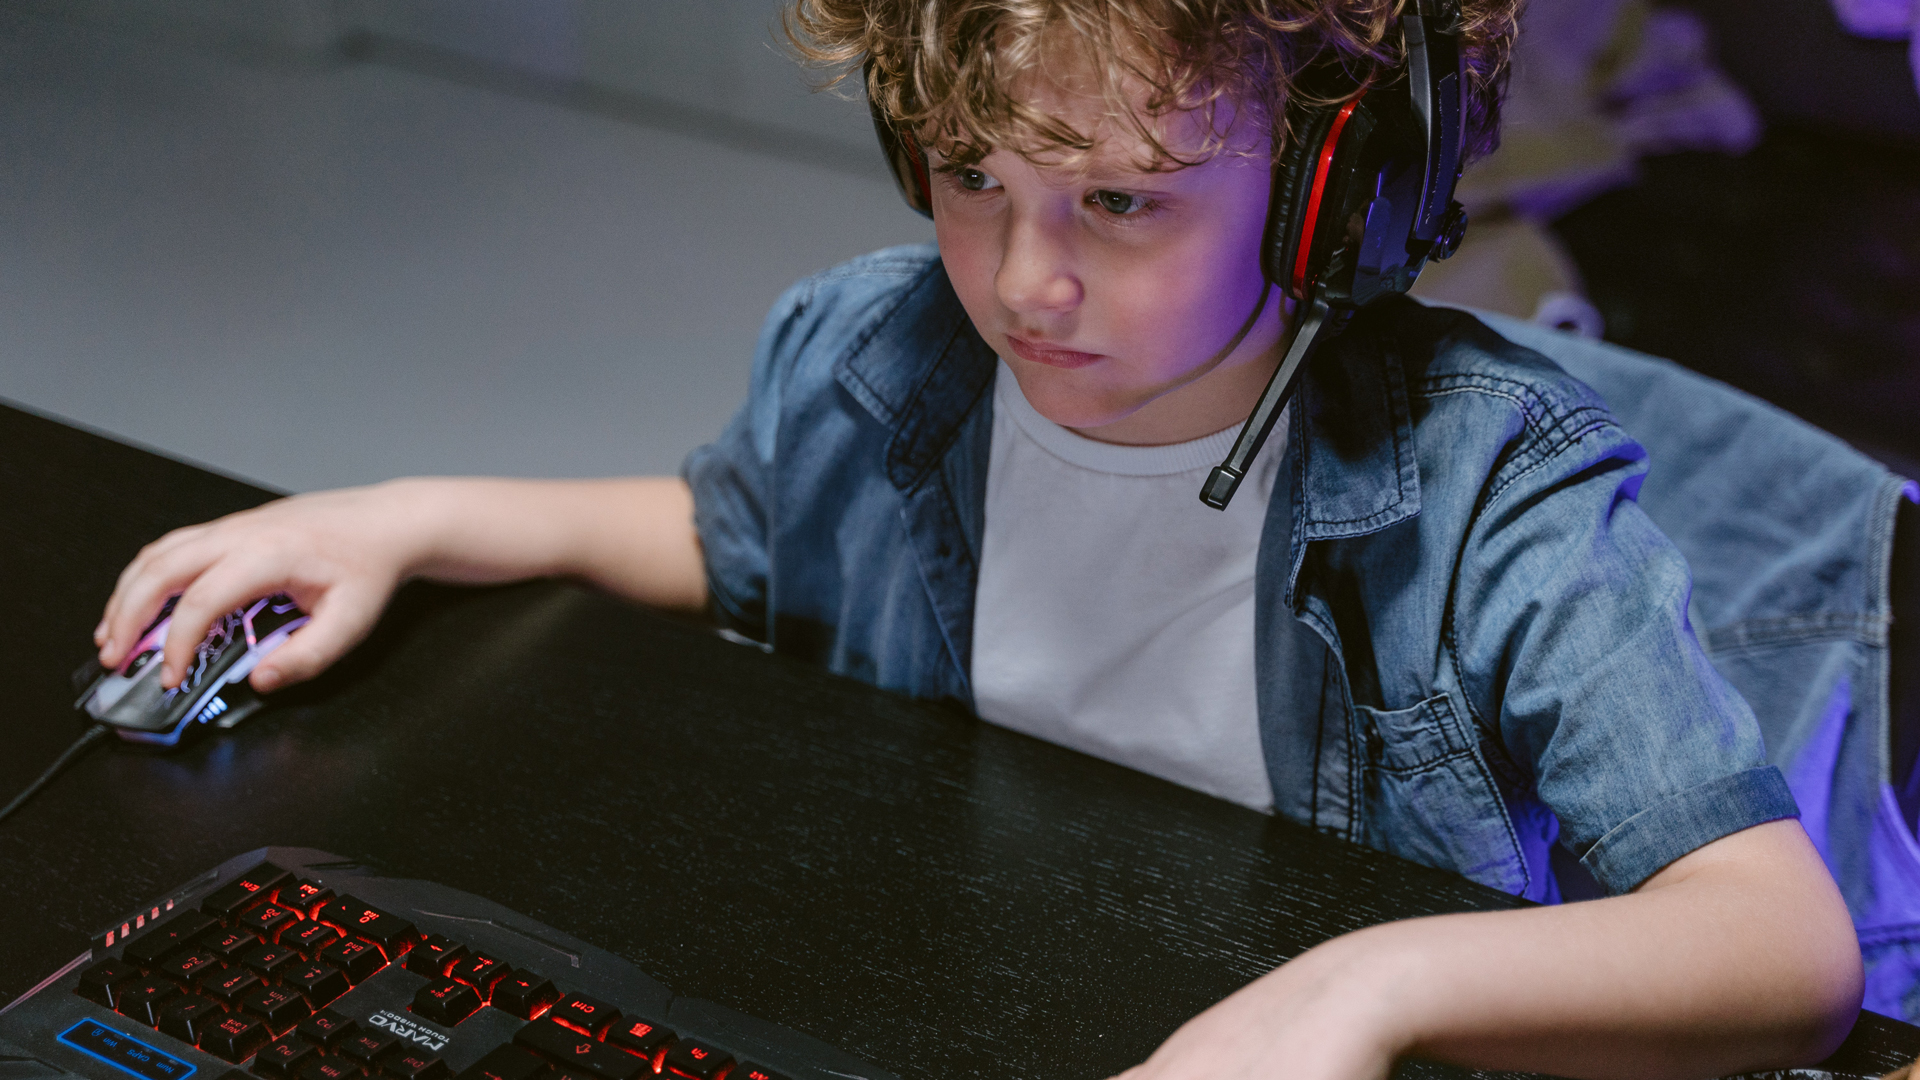 A child wearing a gaming headset plays a videogame on a PC.